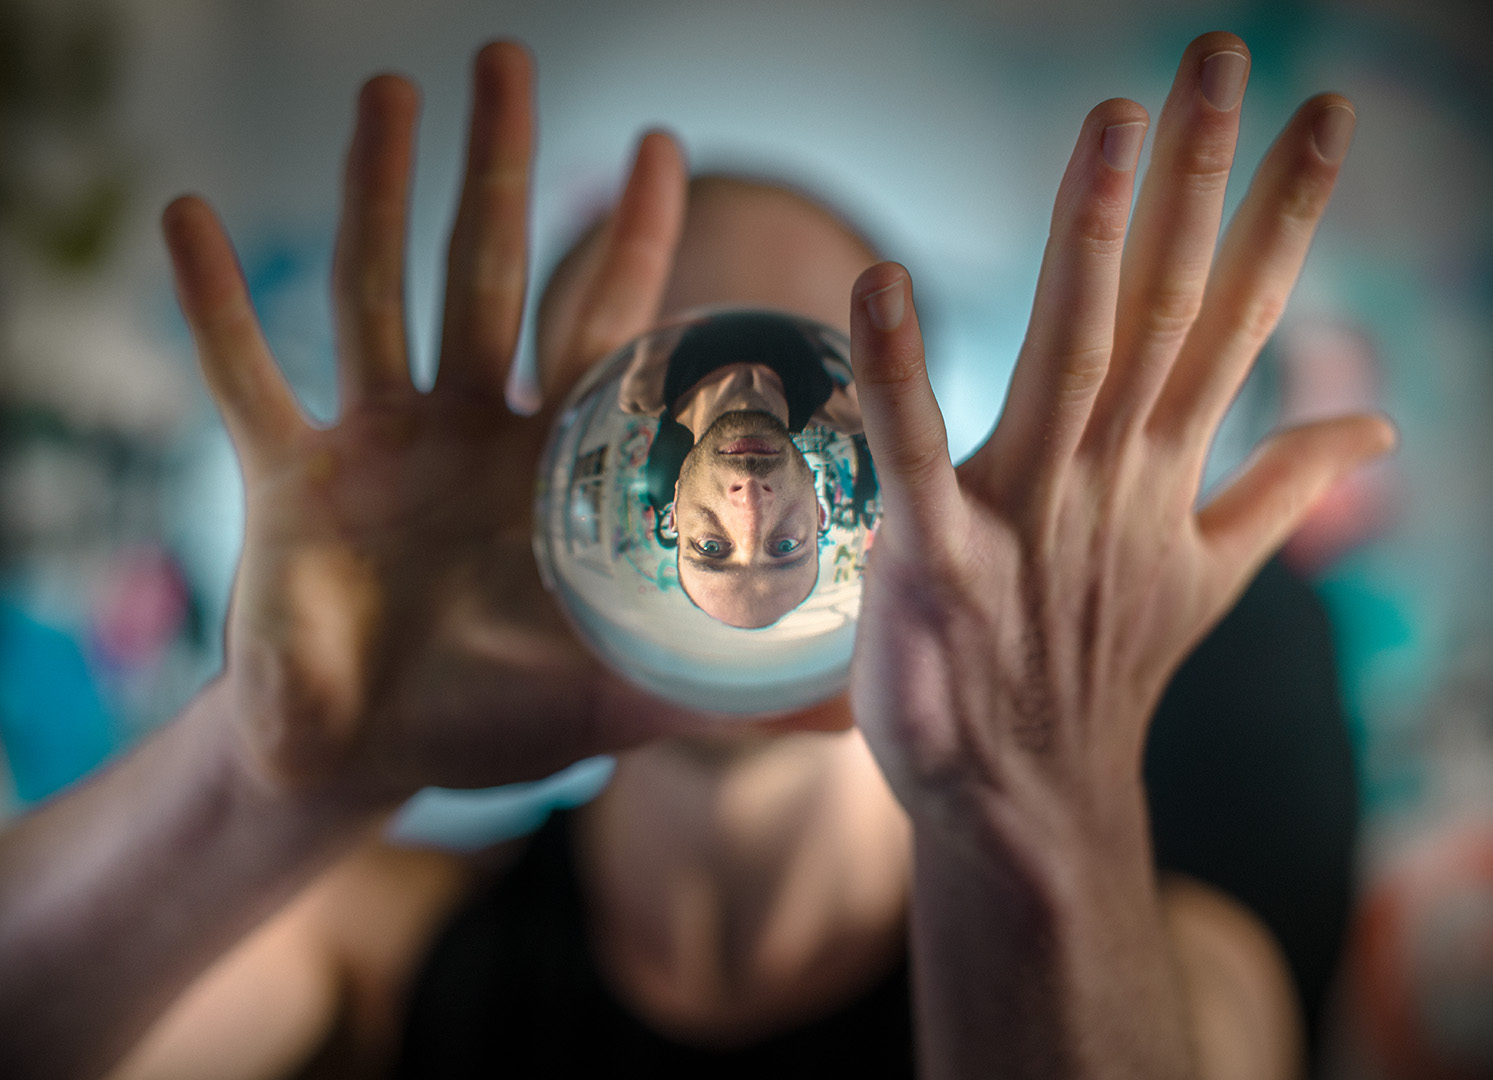 Colour photographic portrait of male manipulating solid glass sphere his face seen thruogh the ball upside down.